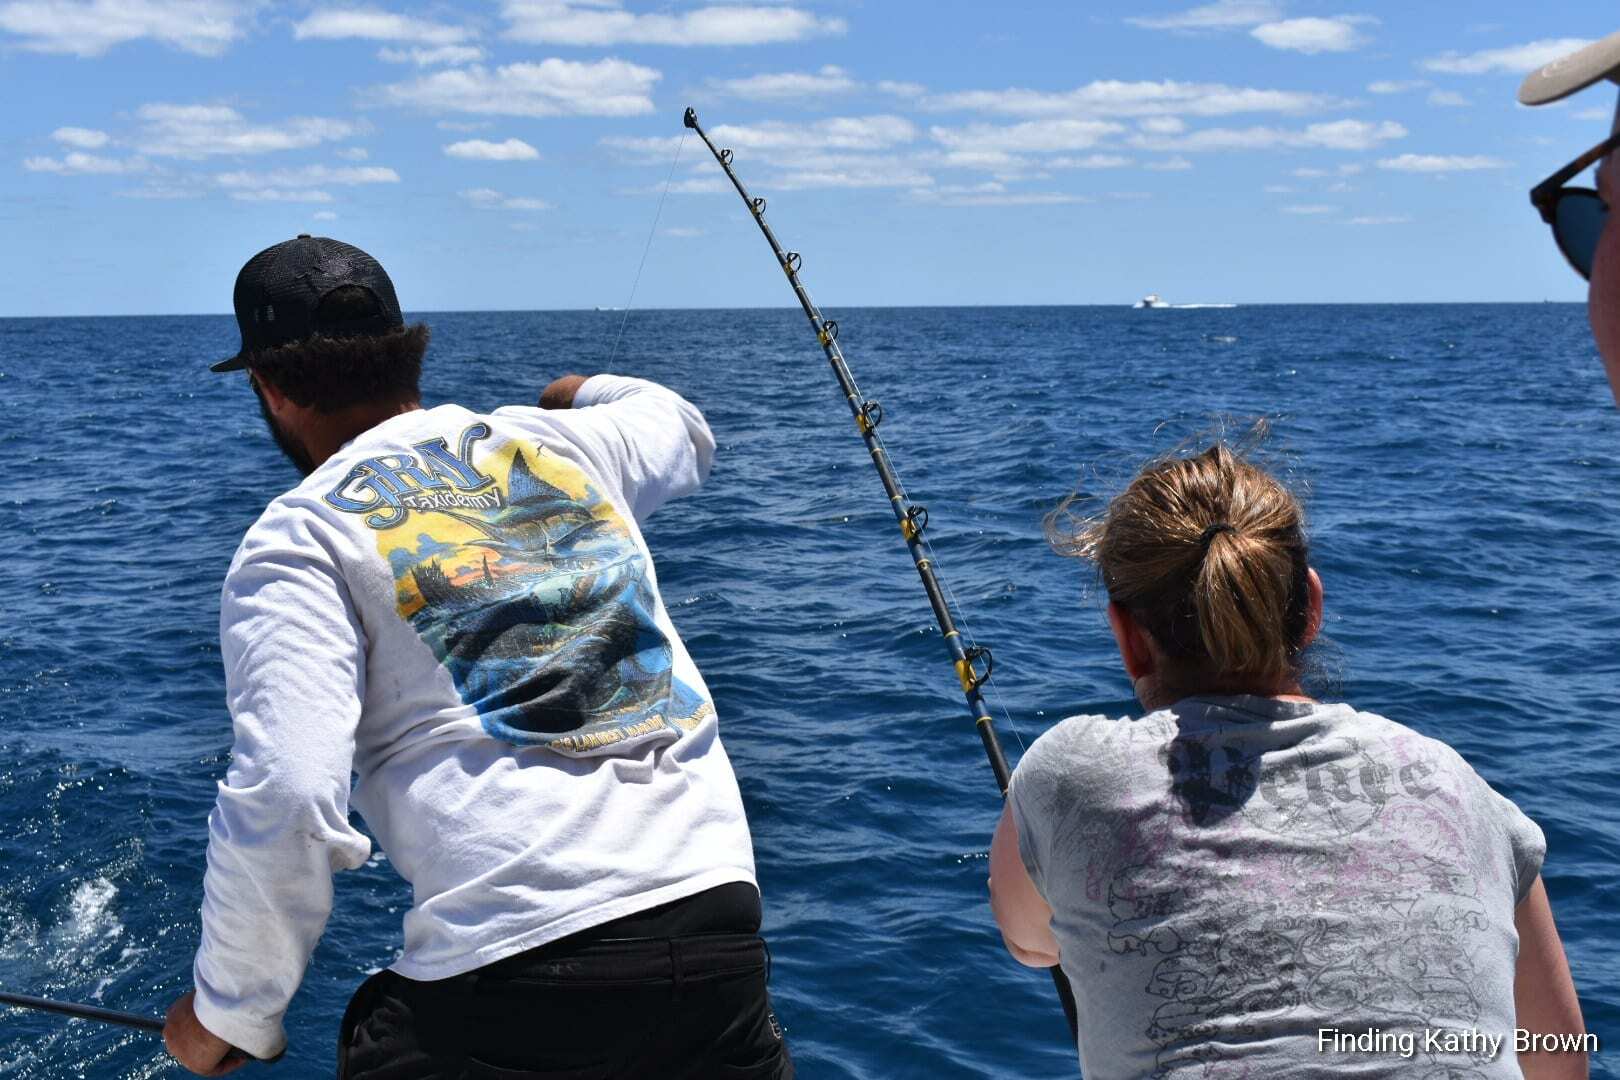 I ventured out of my comfort zone. Sport fishing in Boca Raton became a highlight of our trip and something I plan on continuing. I hope my journey and these 7 reasons have inspired you to embark on your own thrilling fishing expedition with BOLO Charters. Happy travels and tight lines